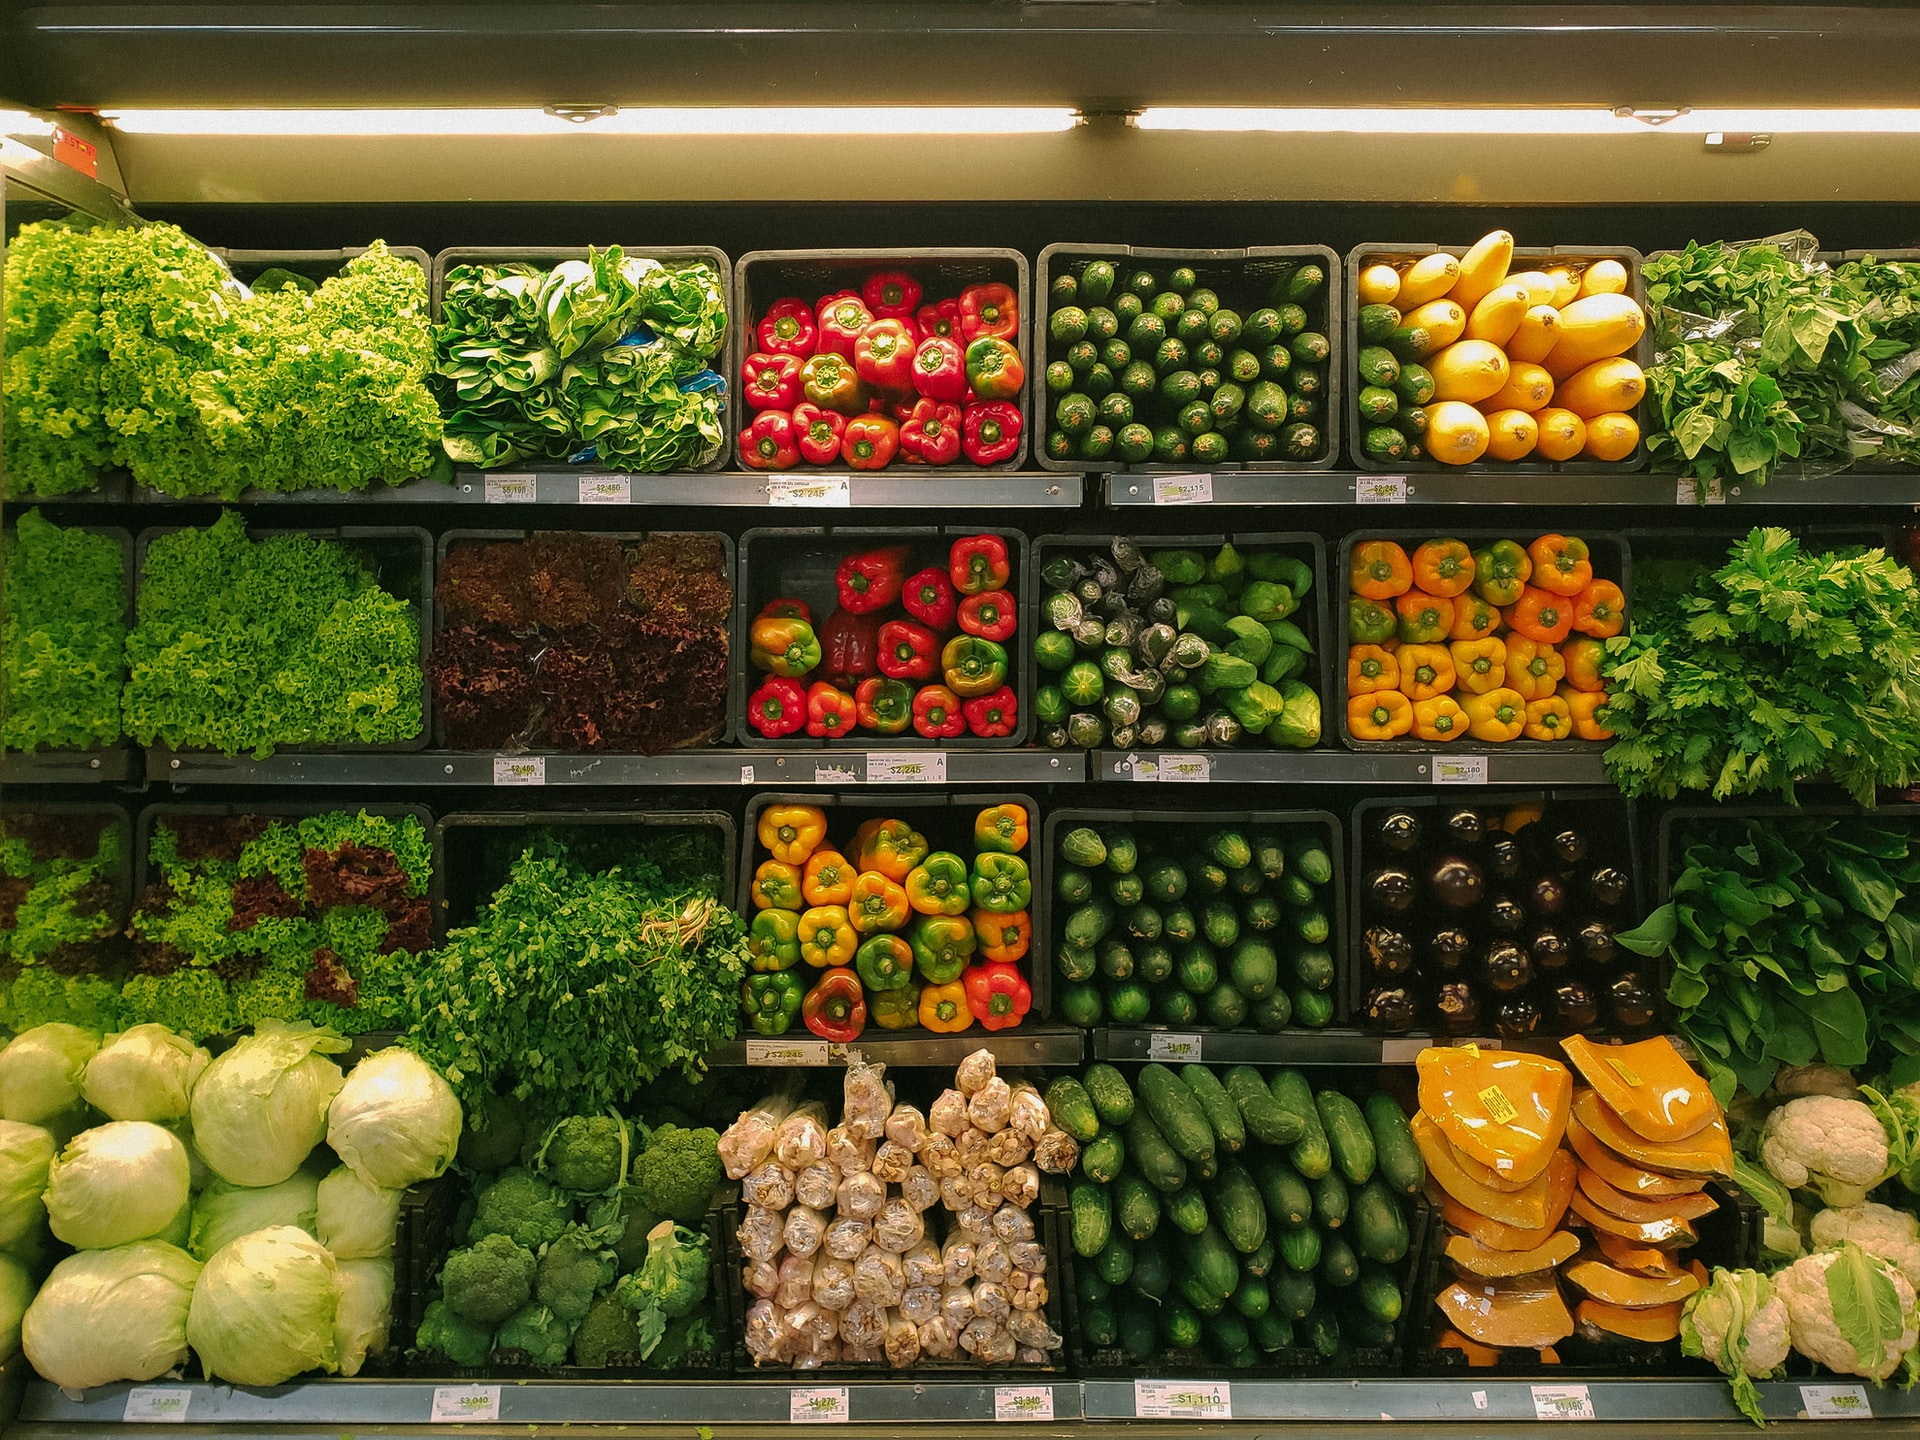 By 2023 it will be forbidden to sell fruits and vegetables in plastic containers in Spain, and beverages are to be offered in reusable containers in all retail establishments.